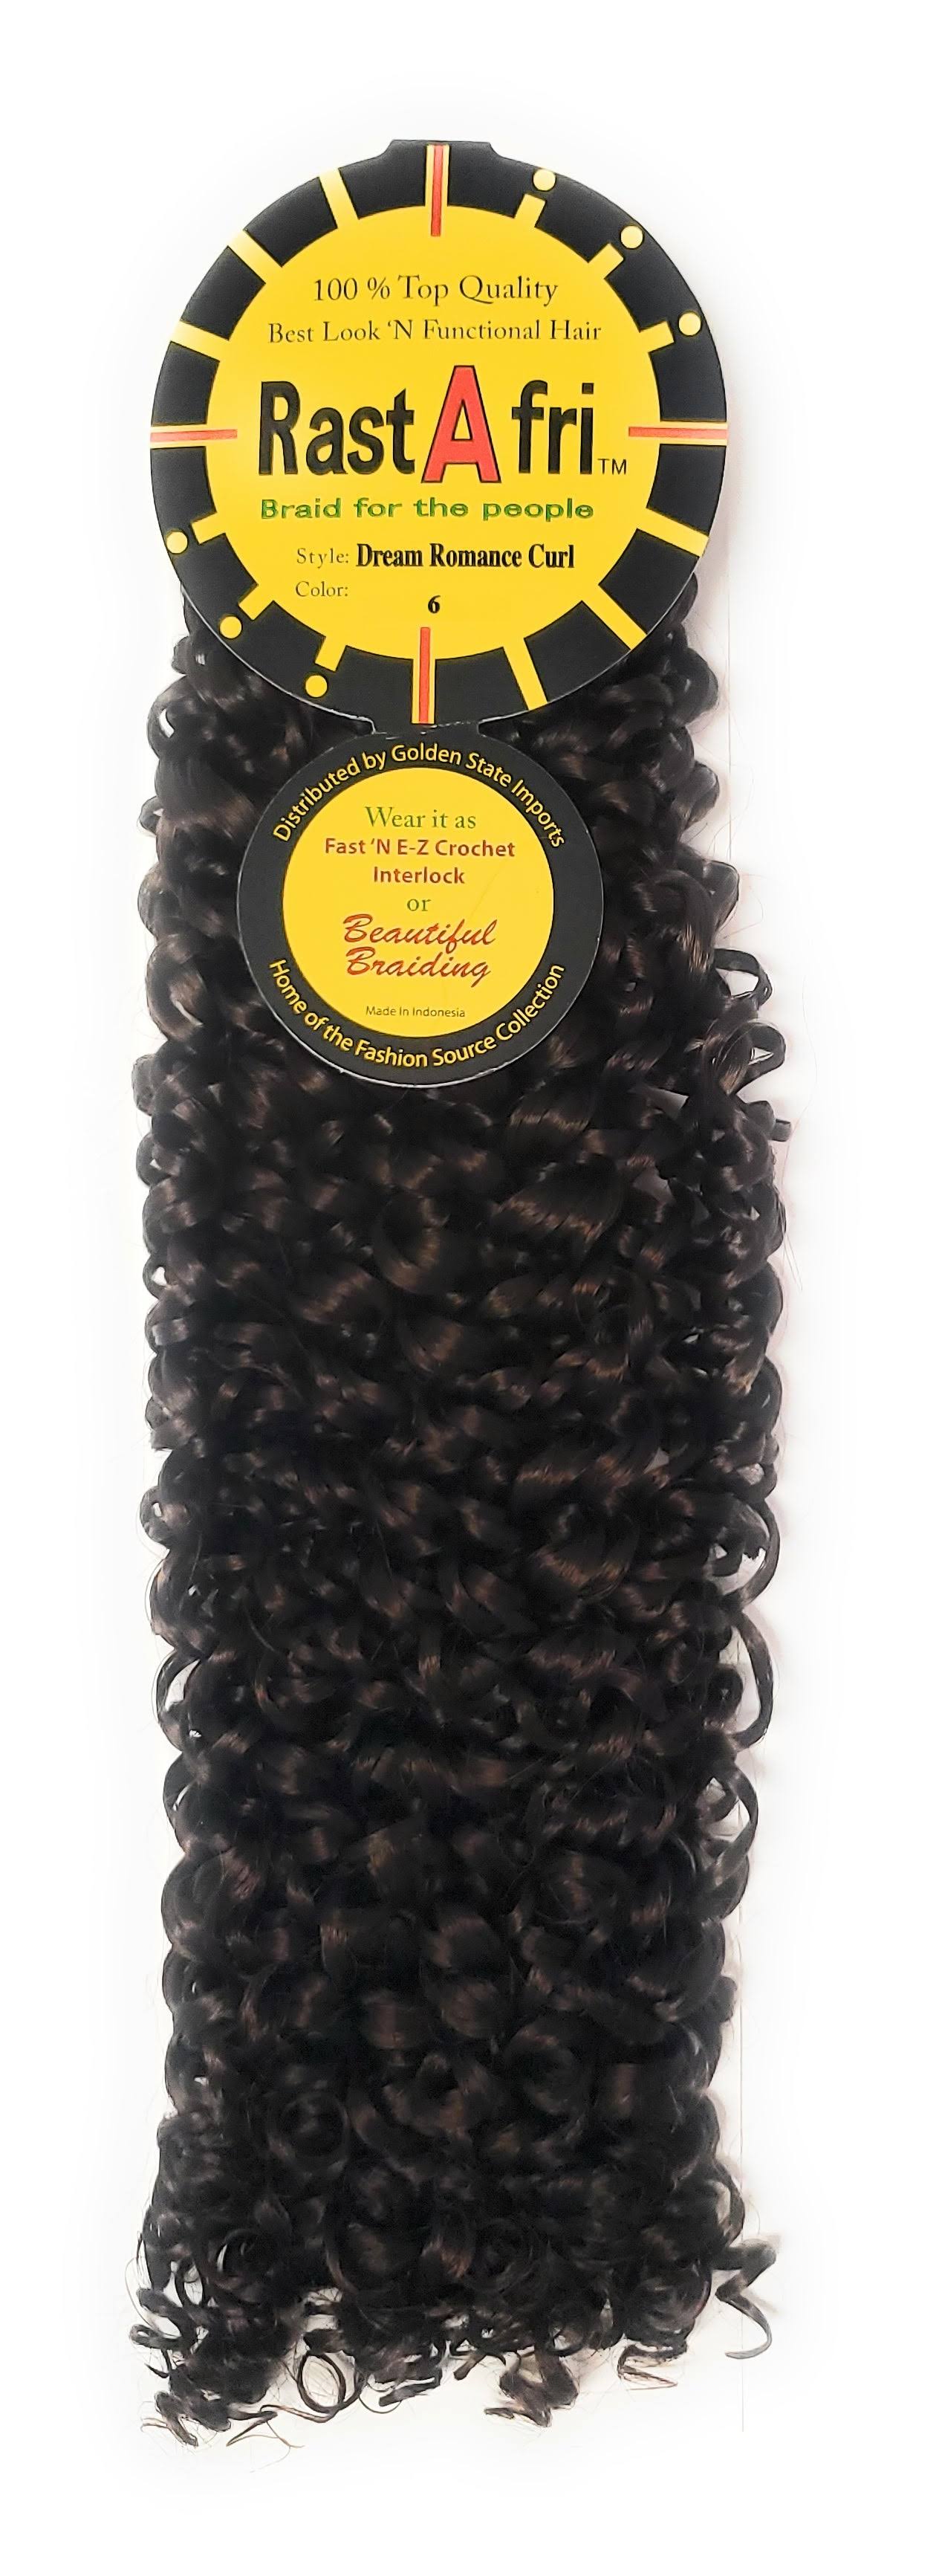 Dream Romance Curl Colour 6 | Haircare | Best Price Guarantee | 30 Day Money Back Guarantee | Free Shipping On All Orders